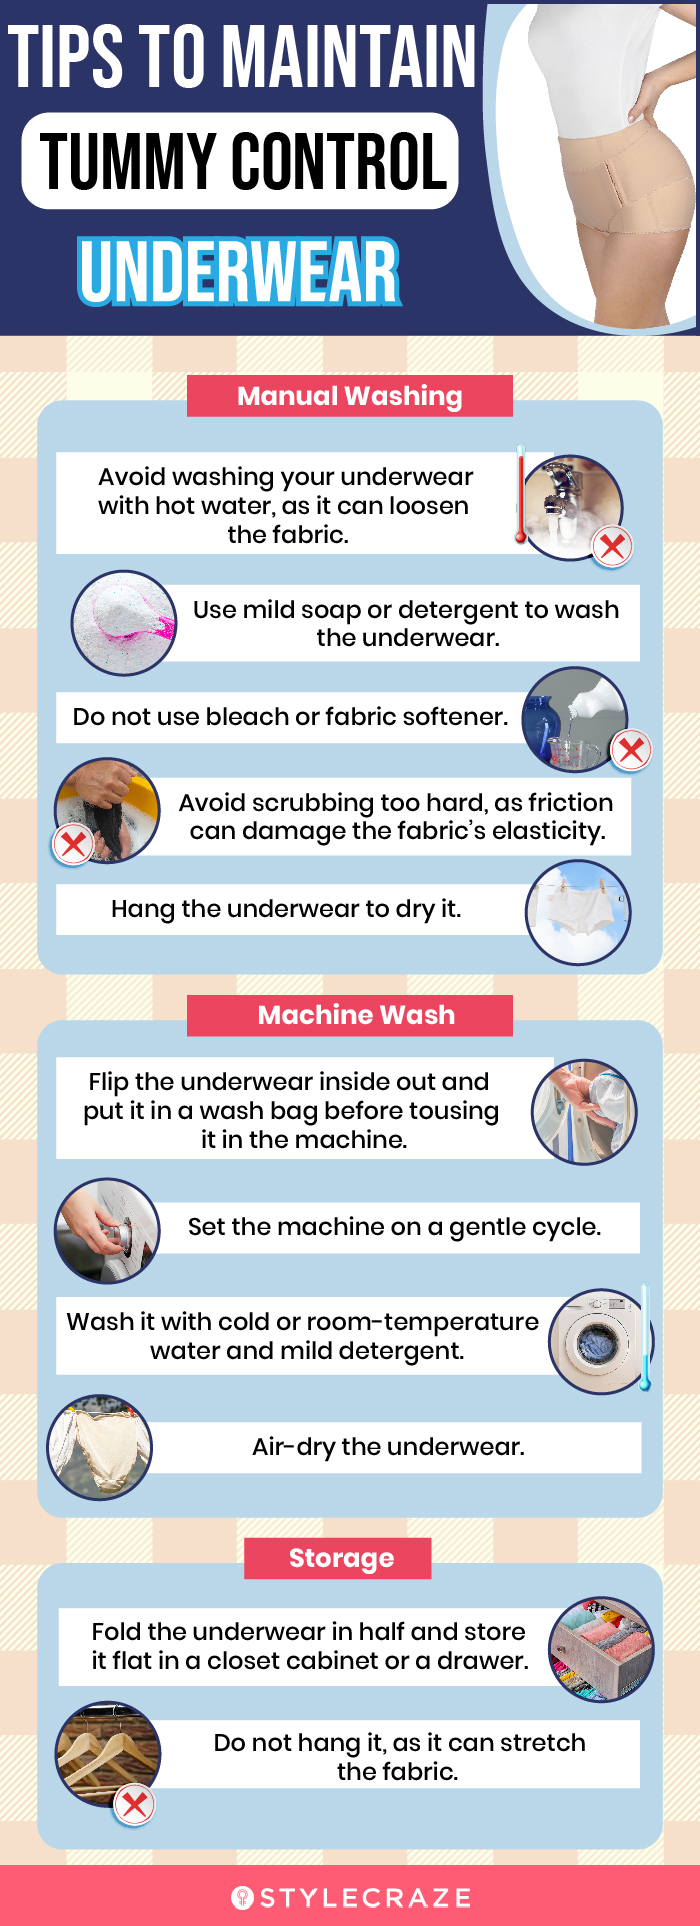 Tips To Maintain Tummy Control Underwearst (infographic)